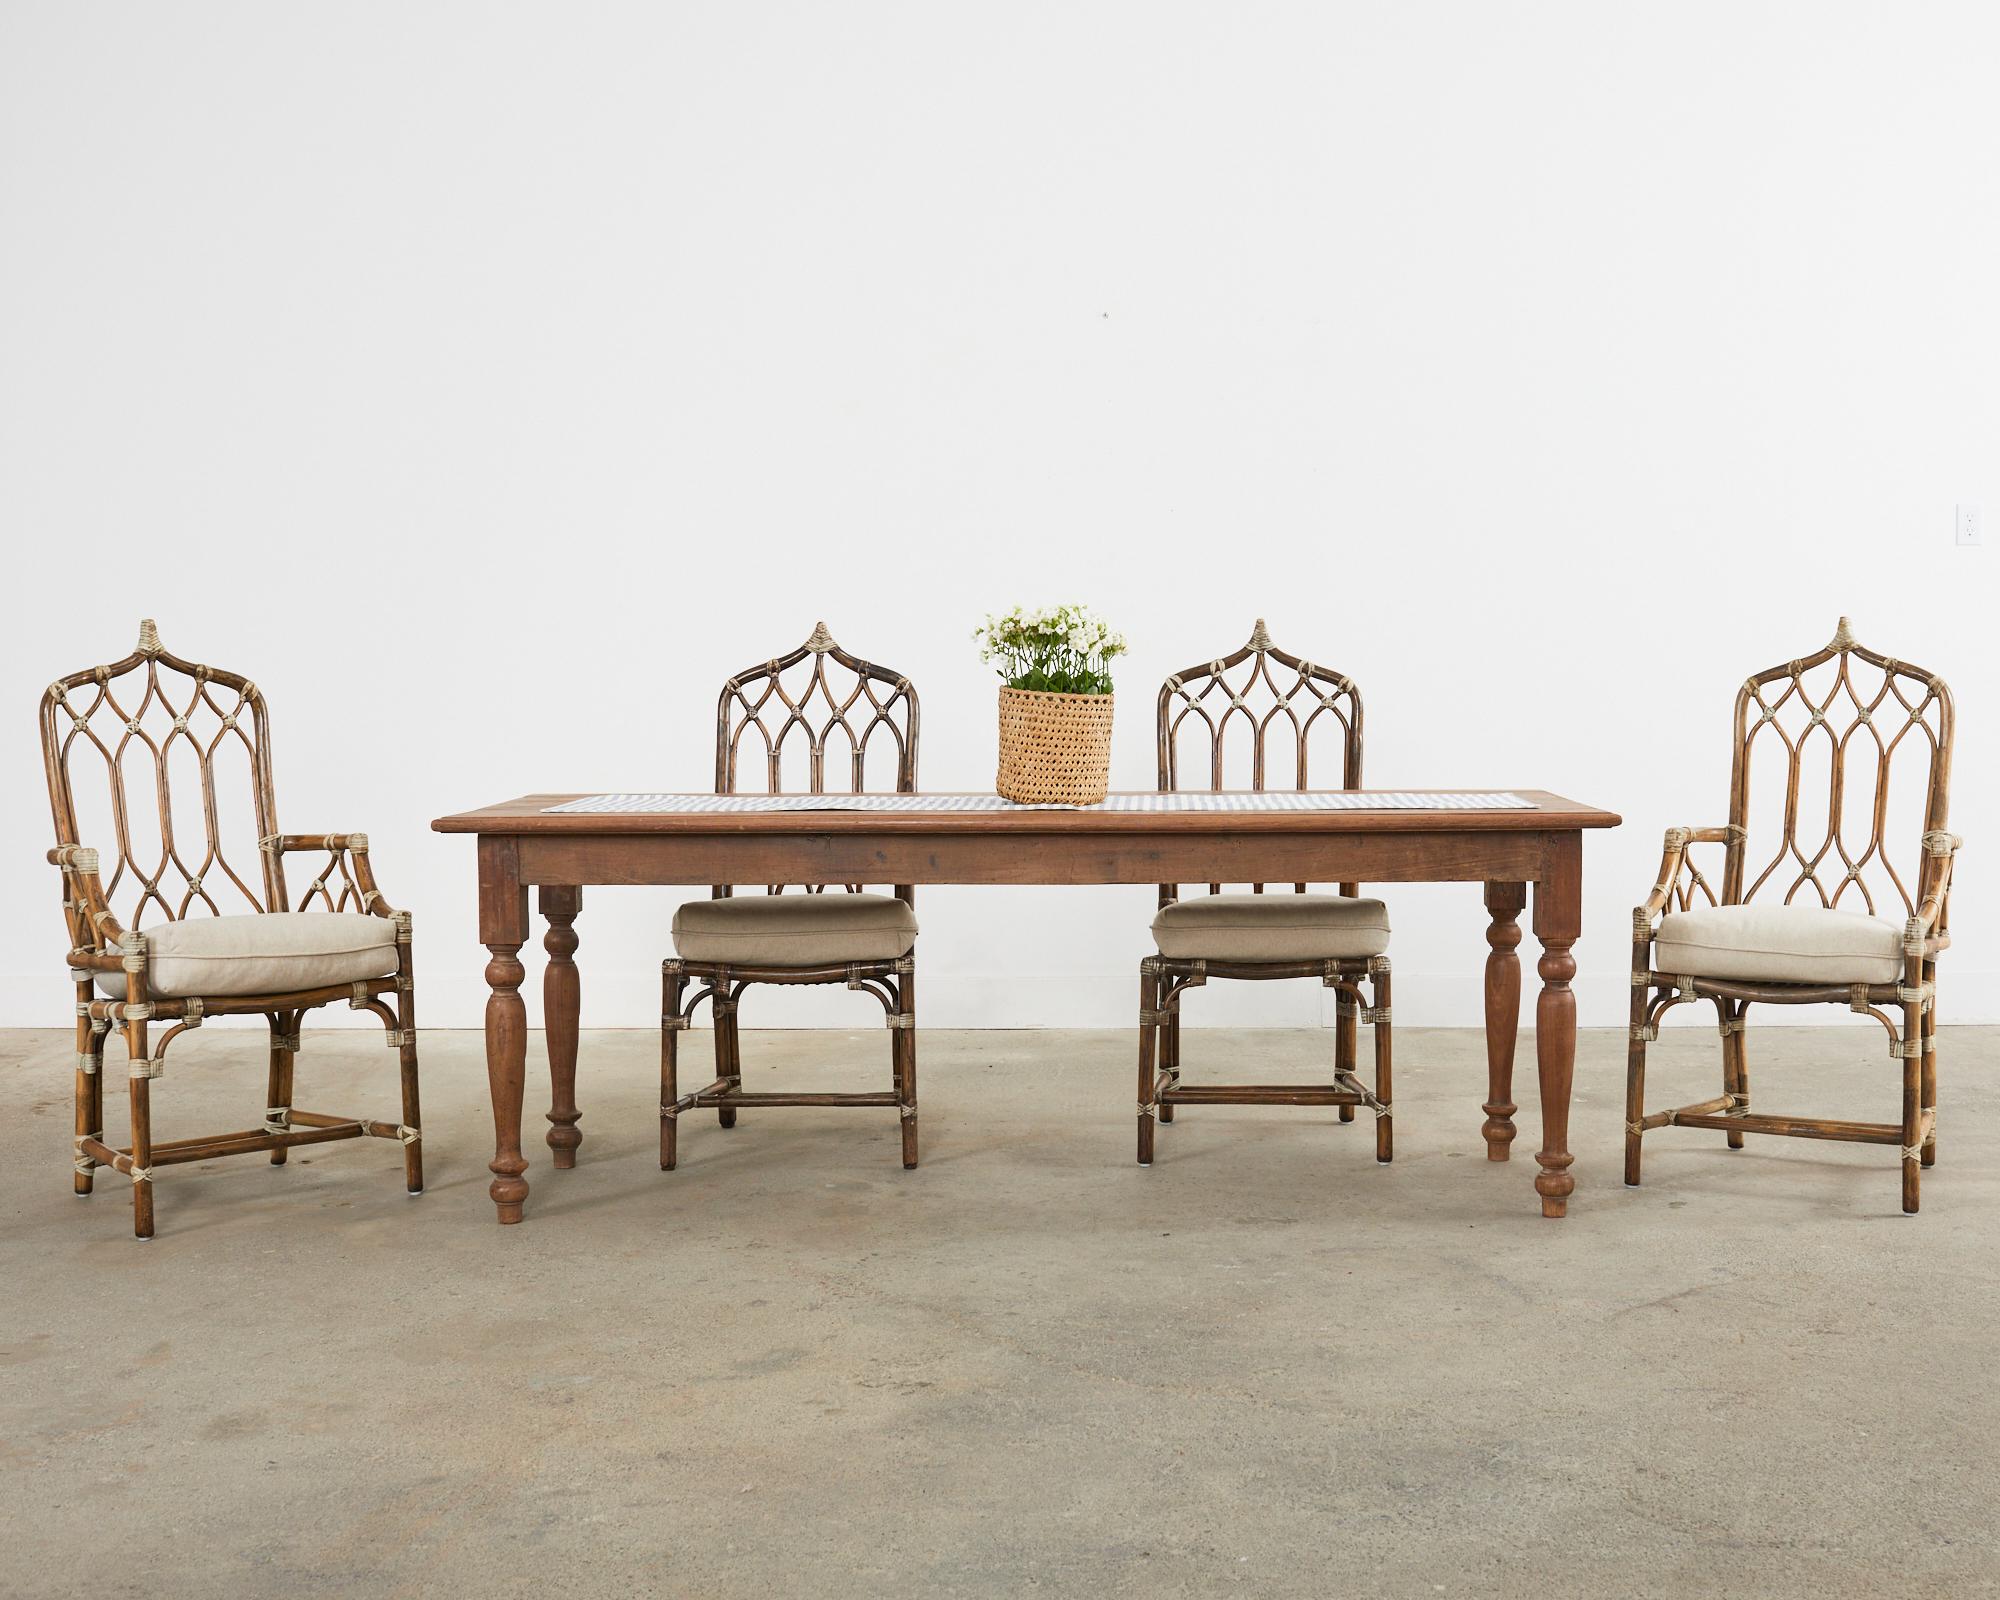 Iconic set of four organic modern rattan dining chairs made by McGuire. 